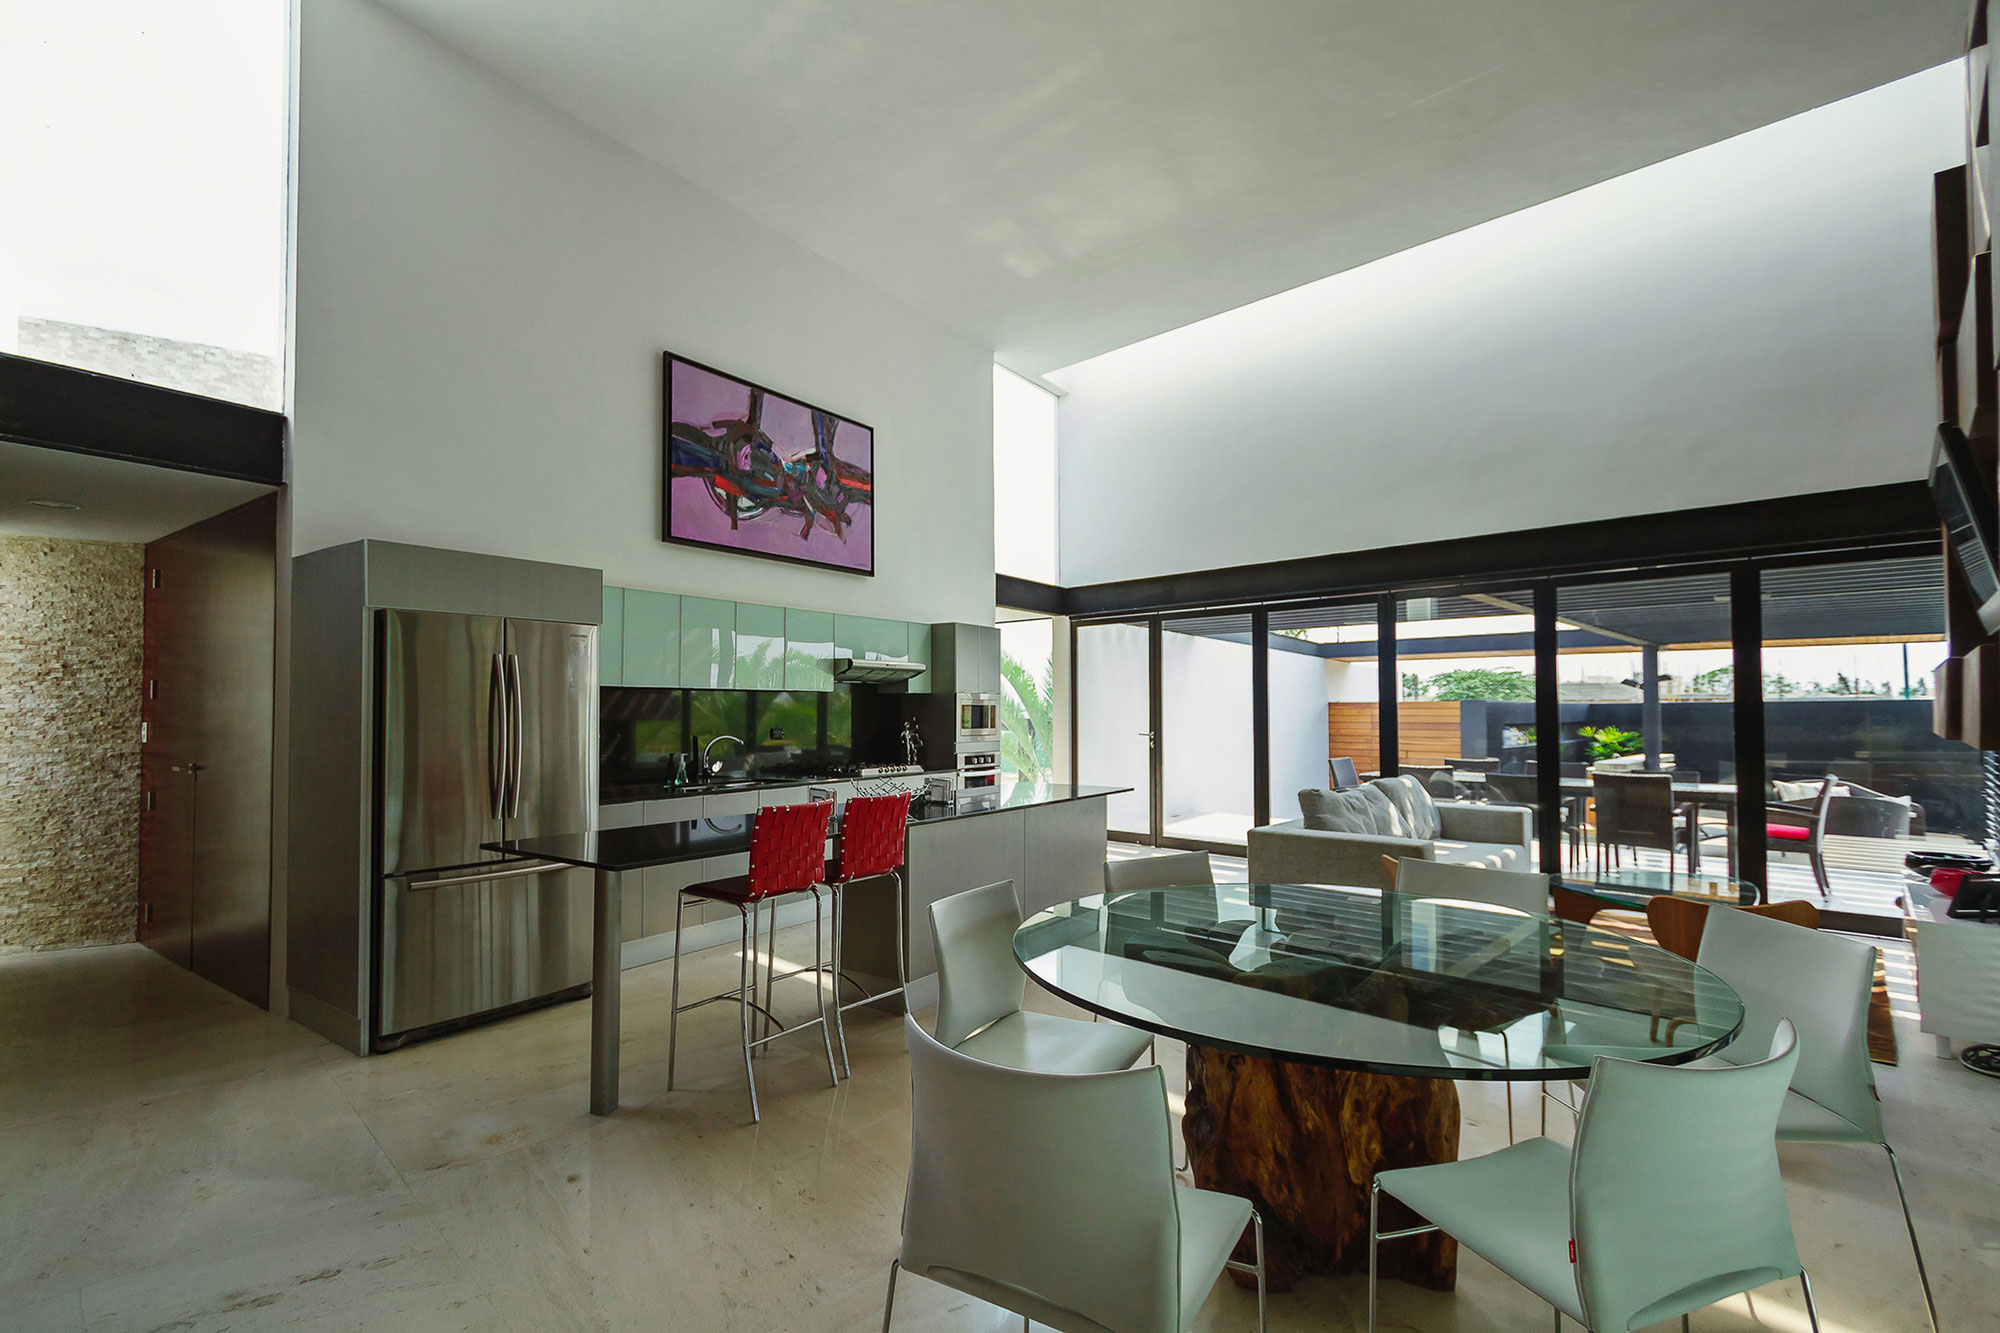 Glass Dining Table, Kitchen Island, Contemporary Residence in Merida, Yucatan